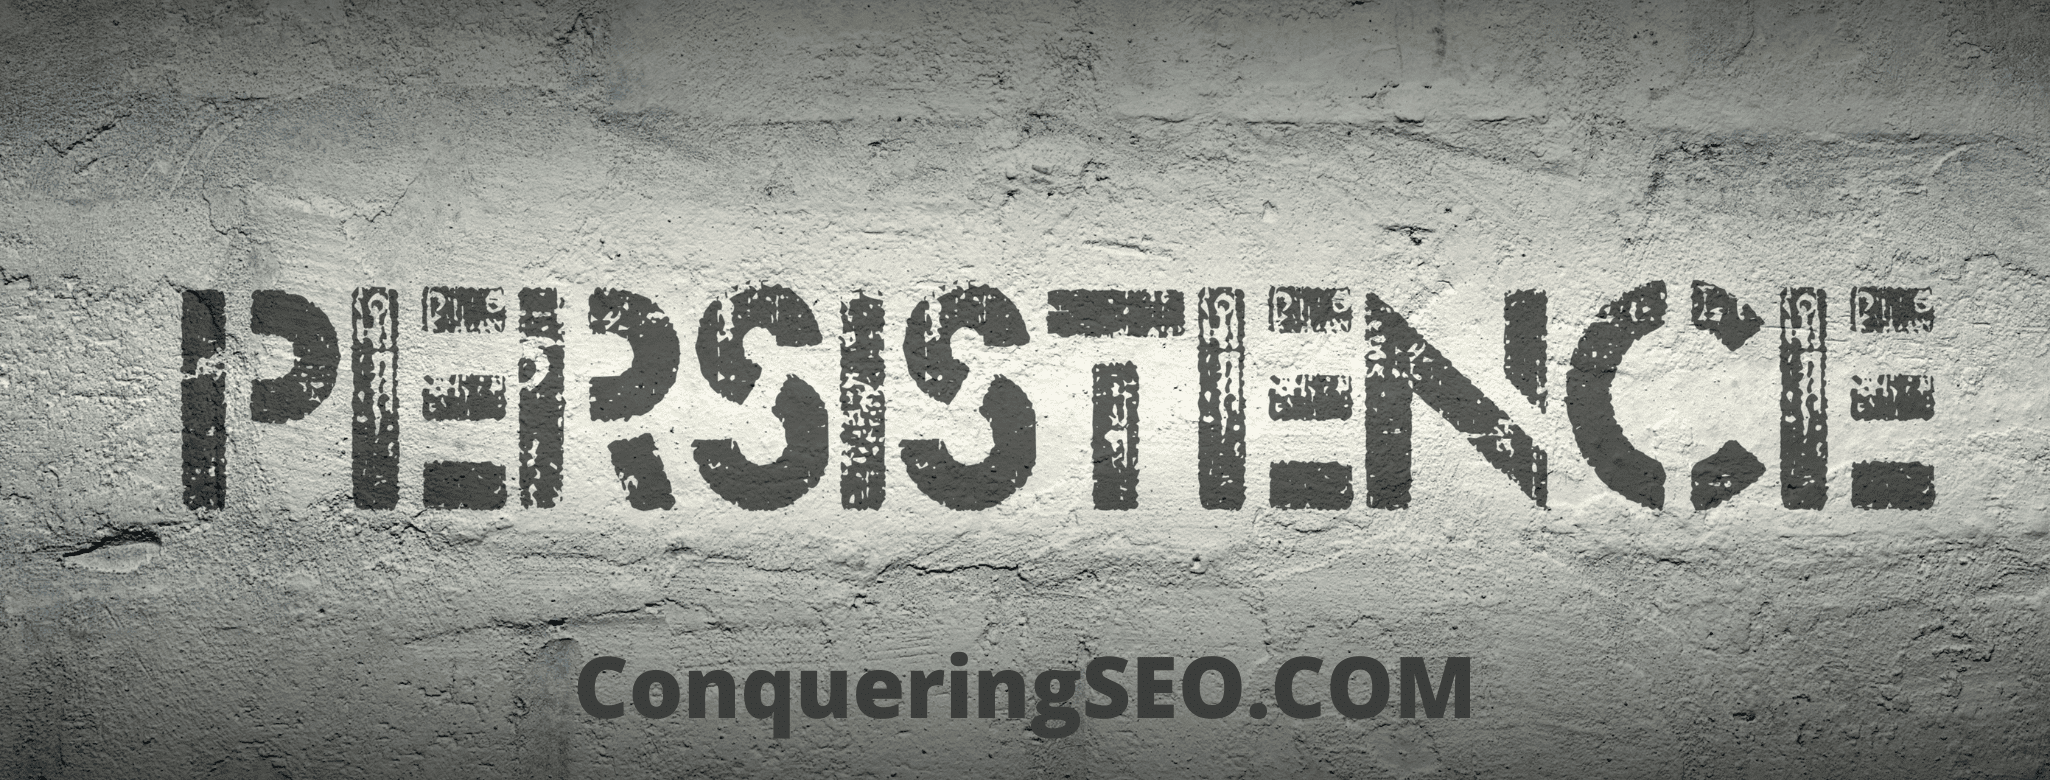 picture of the PERSISTENCE CONQUERINGSEO.COM banner